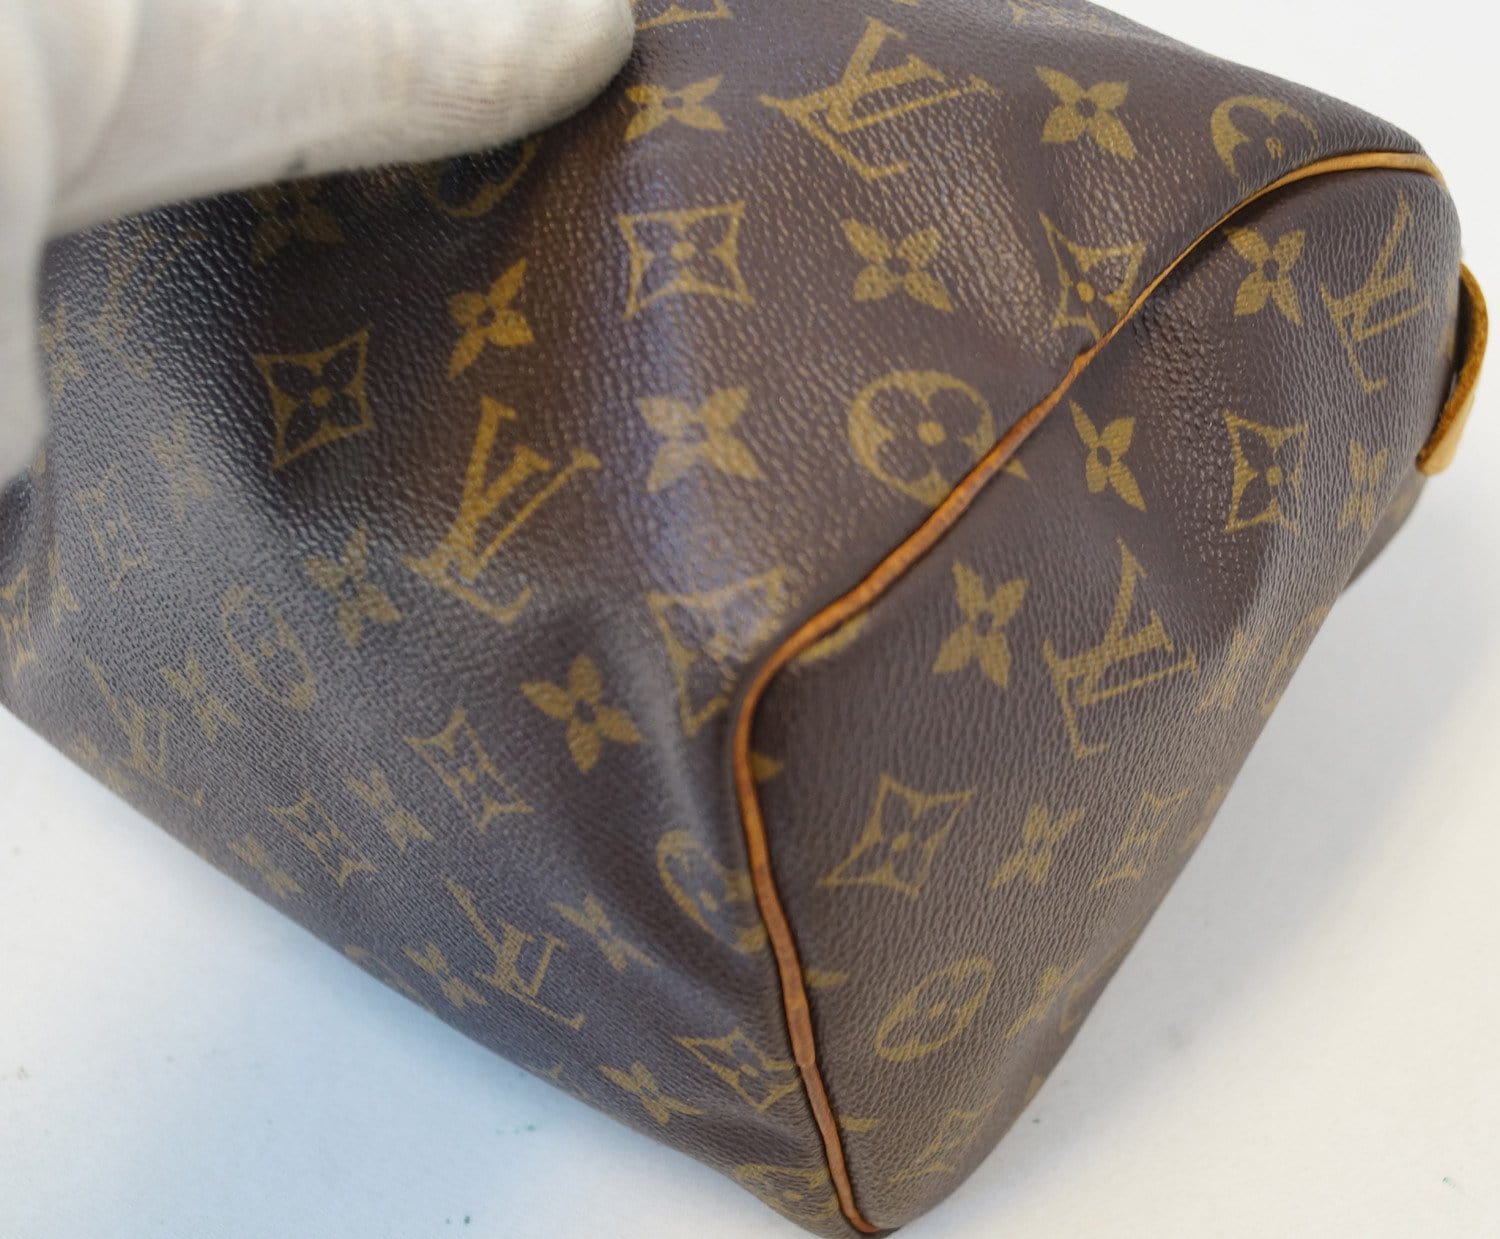 Louis Vuitton Speedy Doctor Bag Monogram Canvas and Leather 25 - ShopStyle